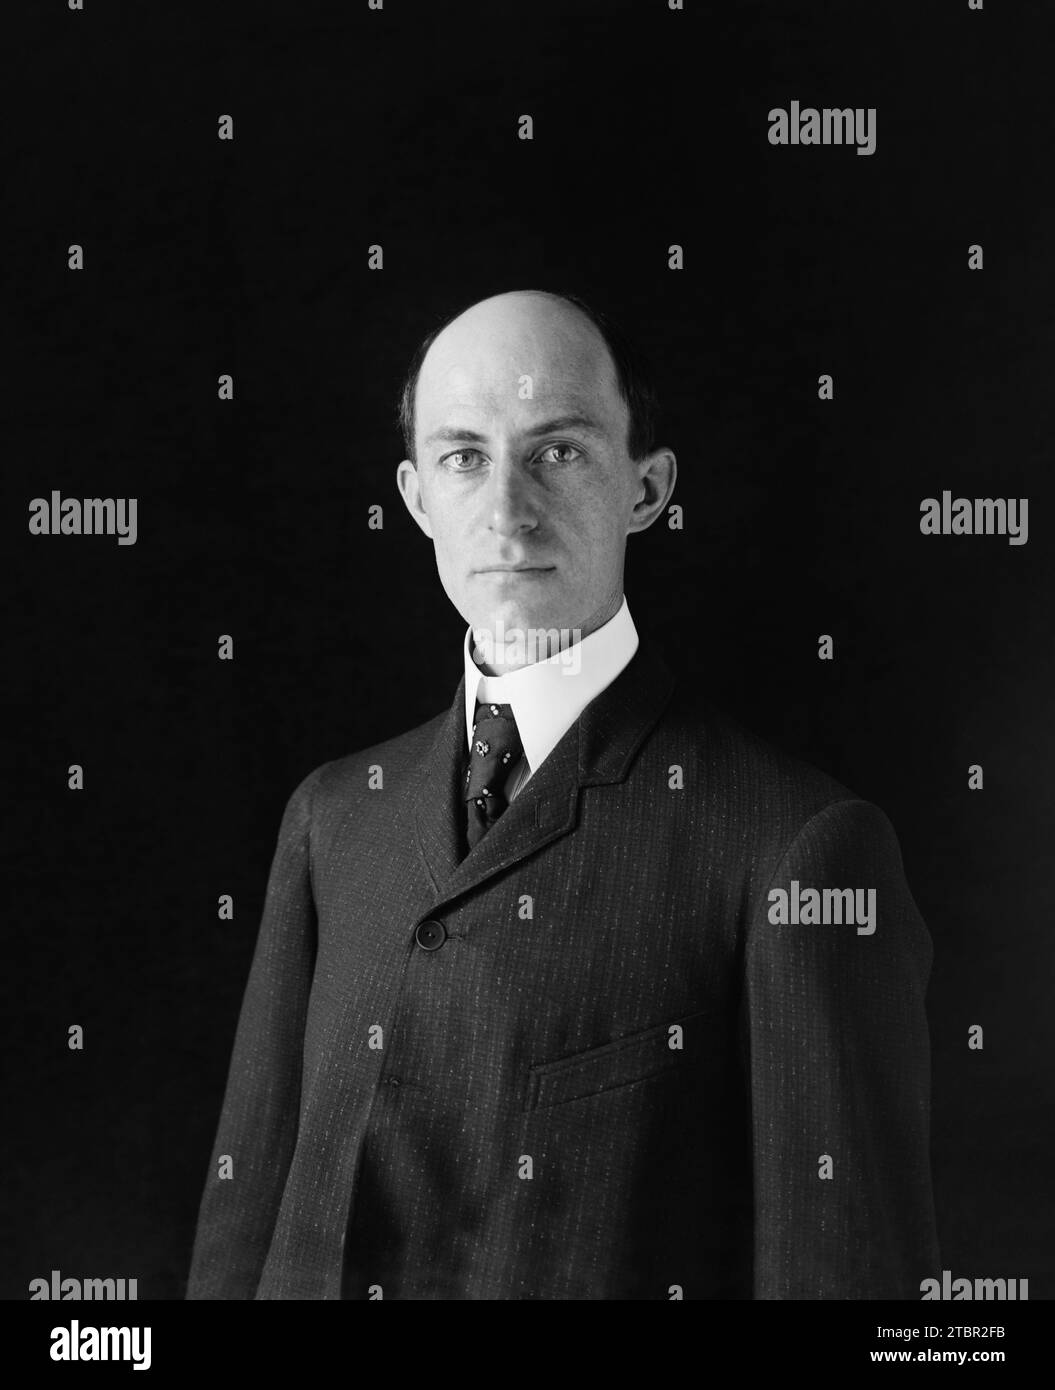 Wilbur Wright, age 38, head and shoulders, about 1905; one of the earliest published photographs of him. Photograph by Orville & Wilbur Wright. Stock Photo